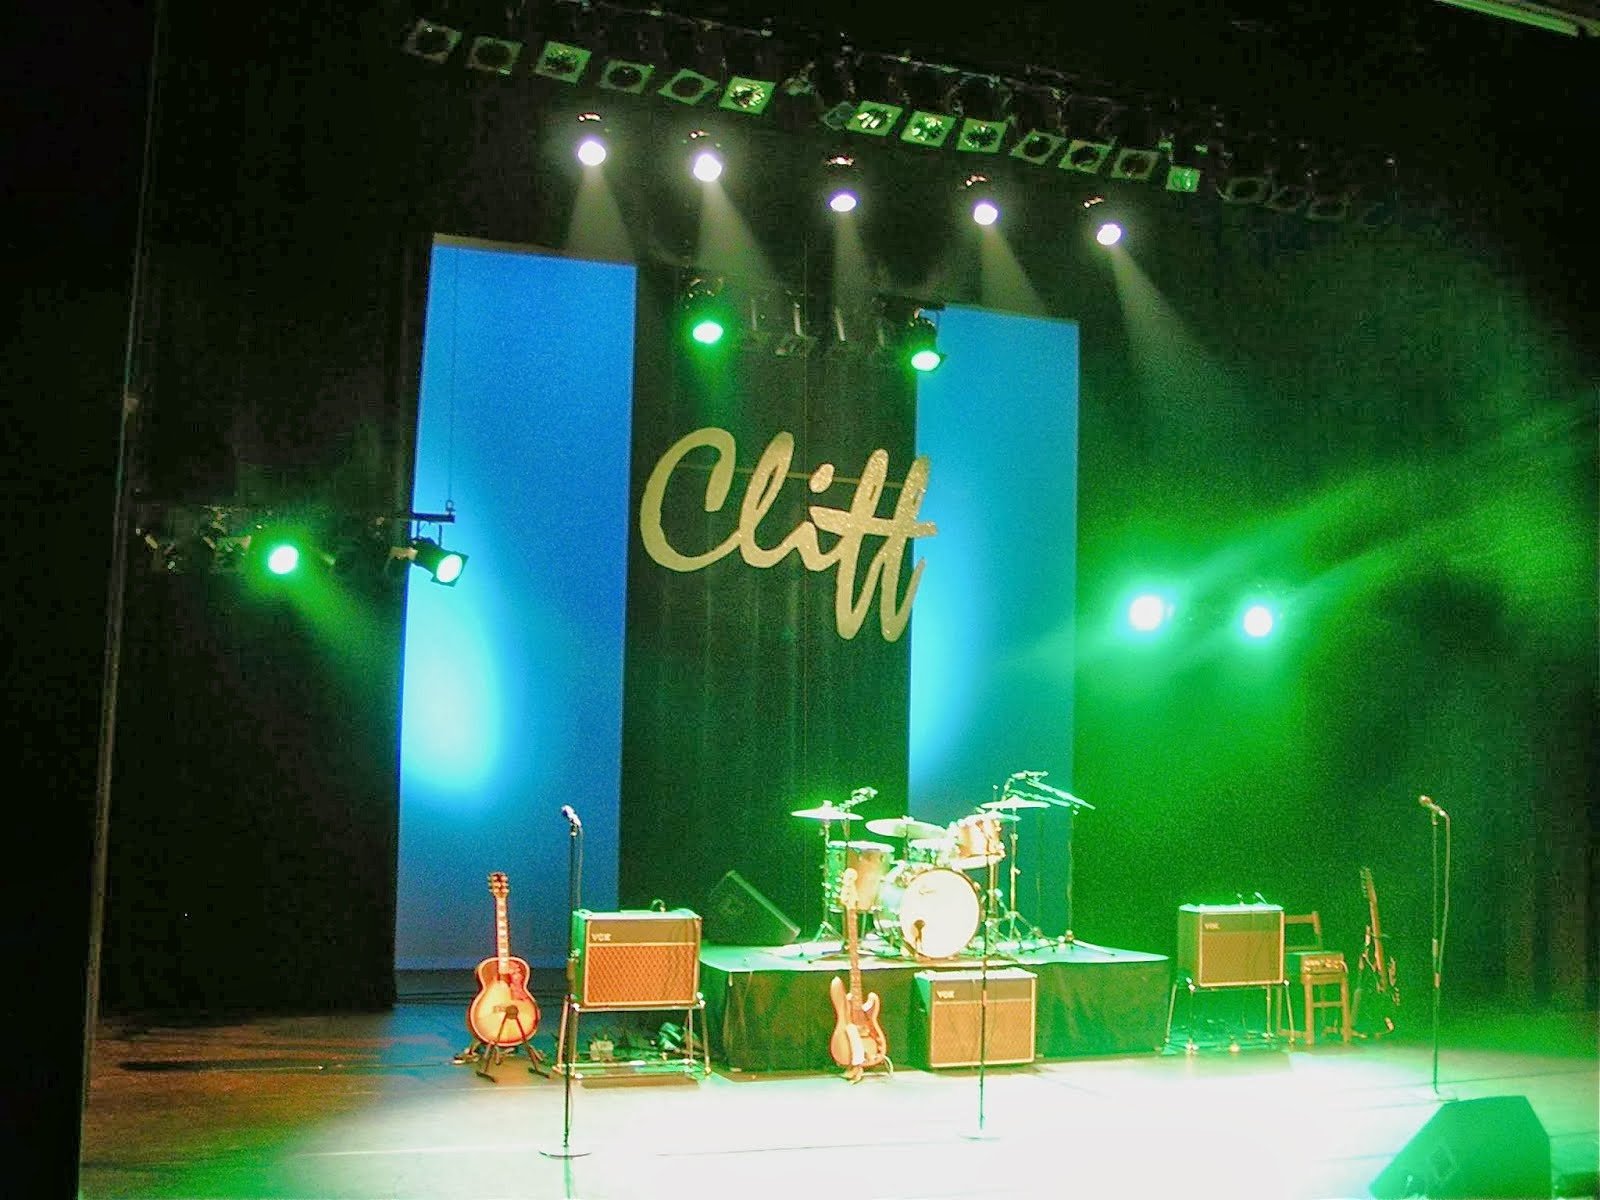 "A Tribute to Cliff"